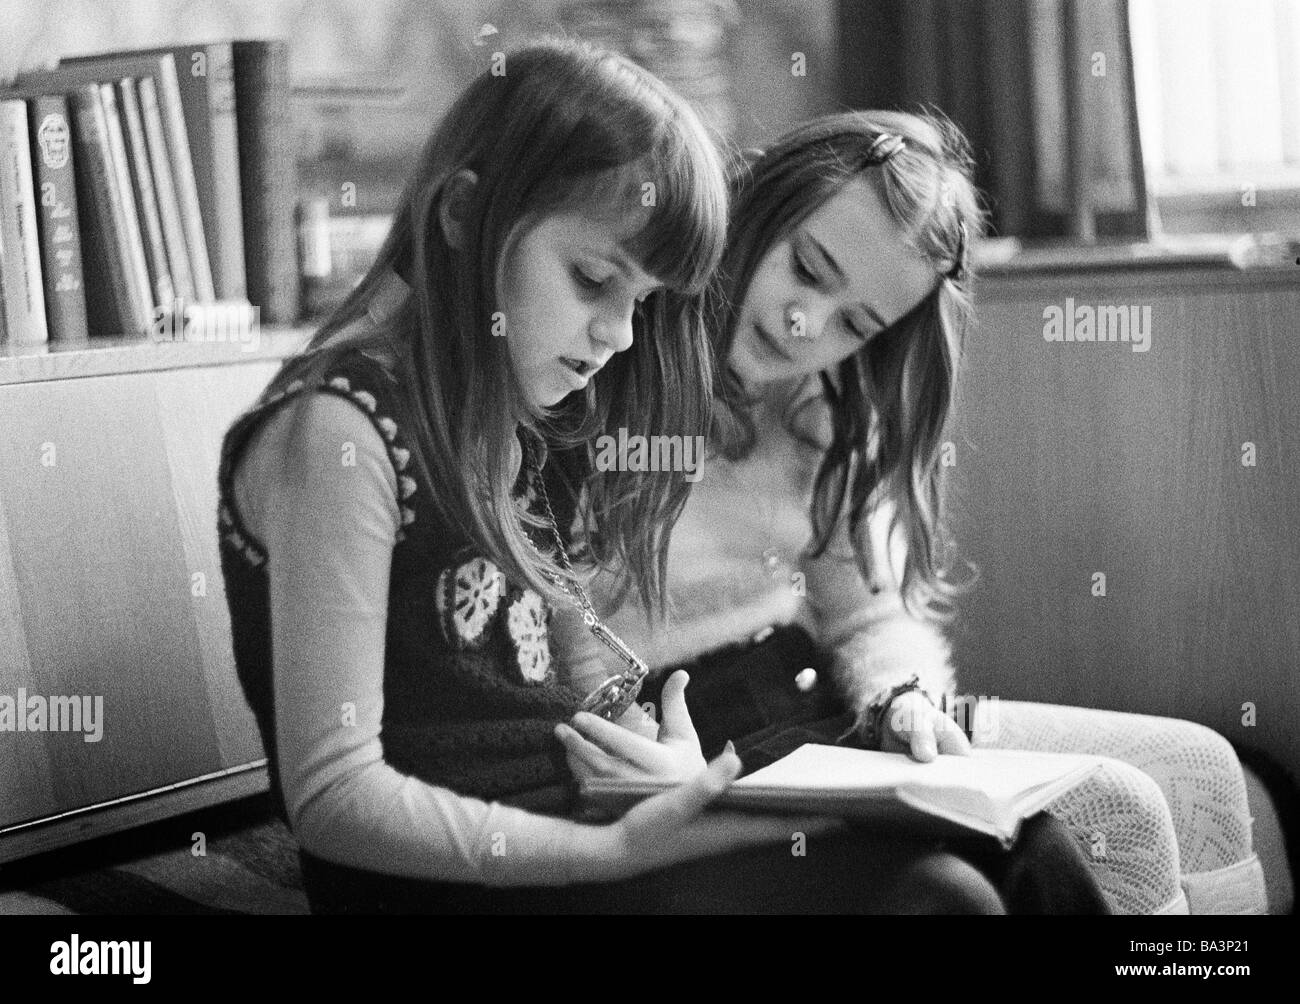 Seventies, black and white photo, people, children, two girls sit side by side reading a book, aged 9 to 11 years, Birgit Stock Photo